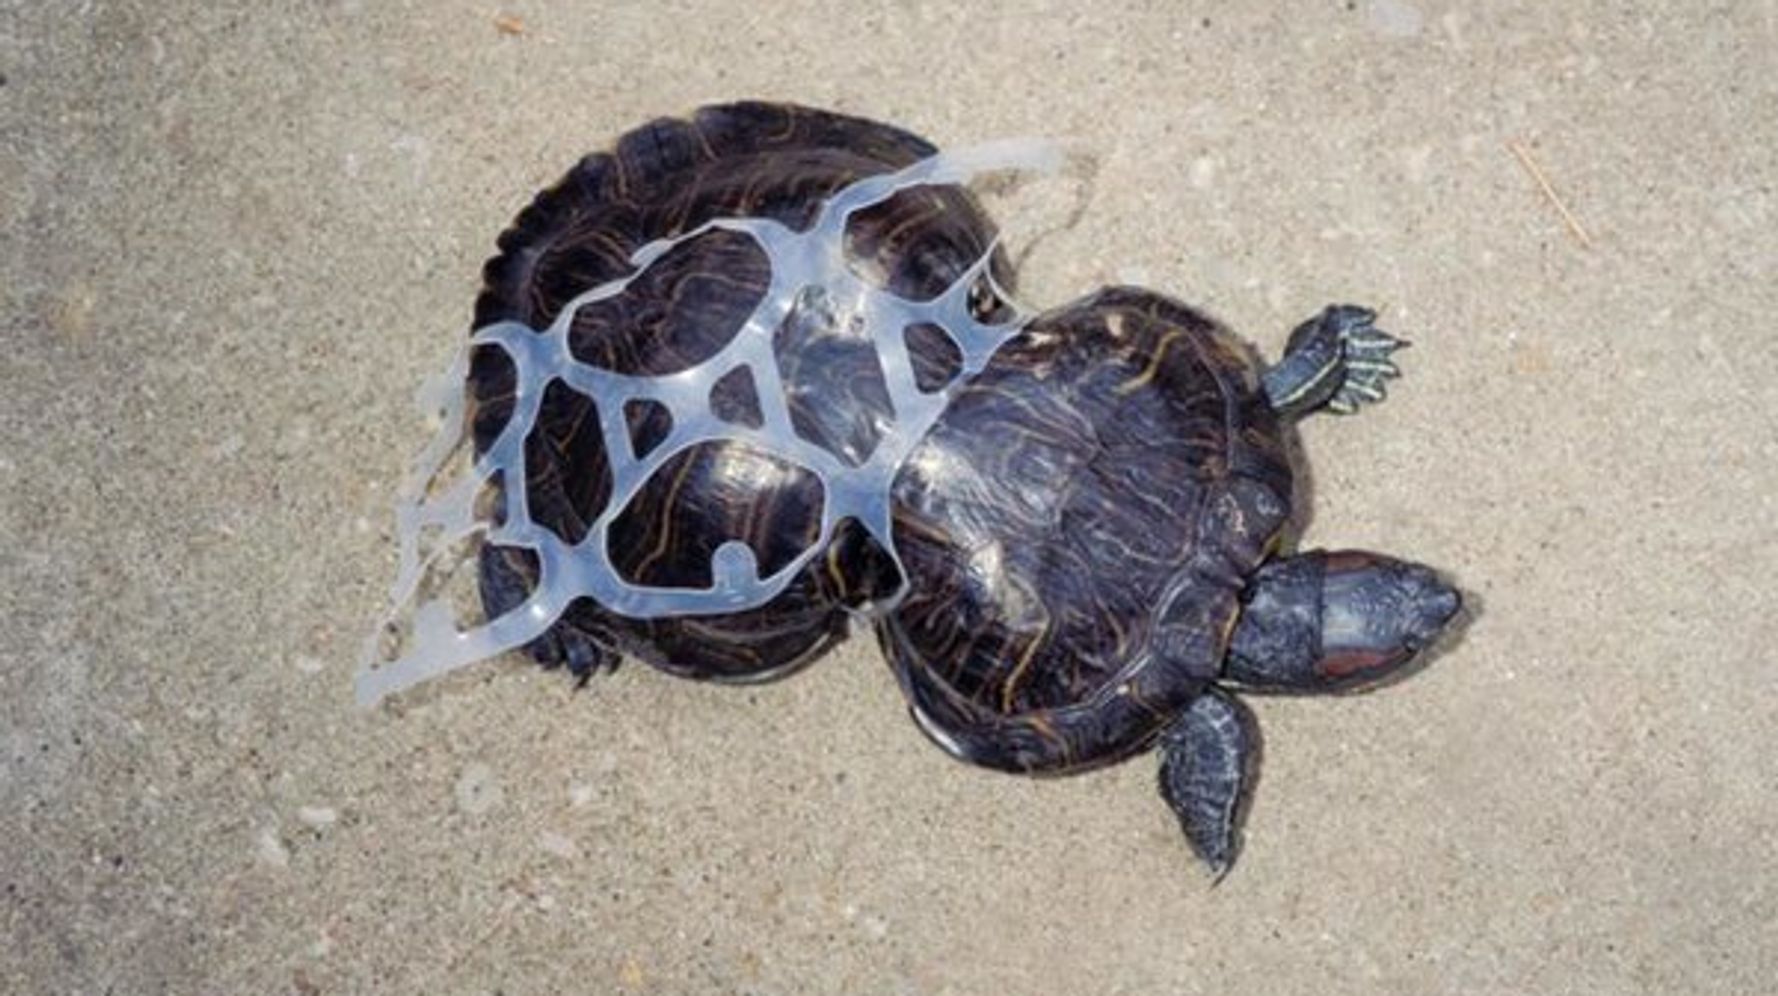 Heartbreaking Photos Show What Your Trash Does To Animals | HuffPost